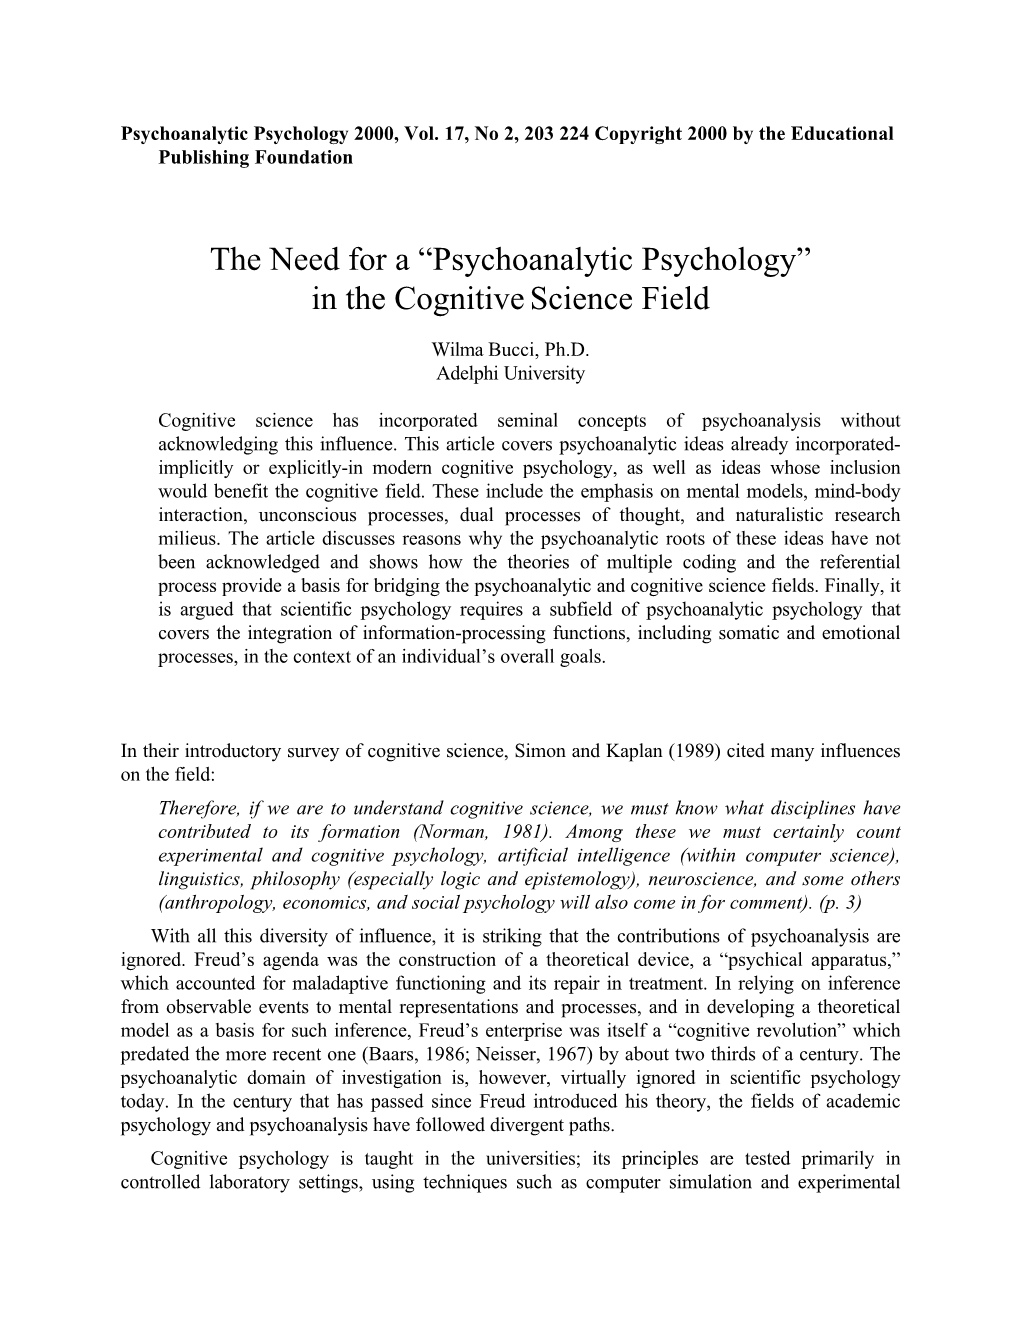 The Need for a “Psychoanalytic Psychology” in the Cognitive Science Field